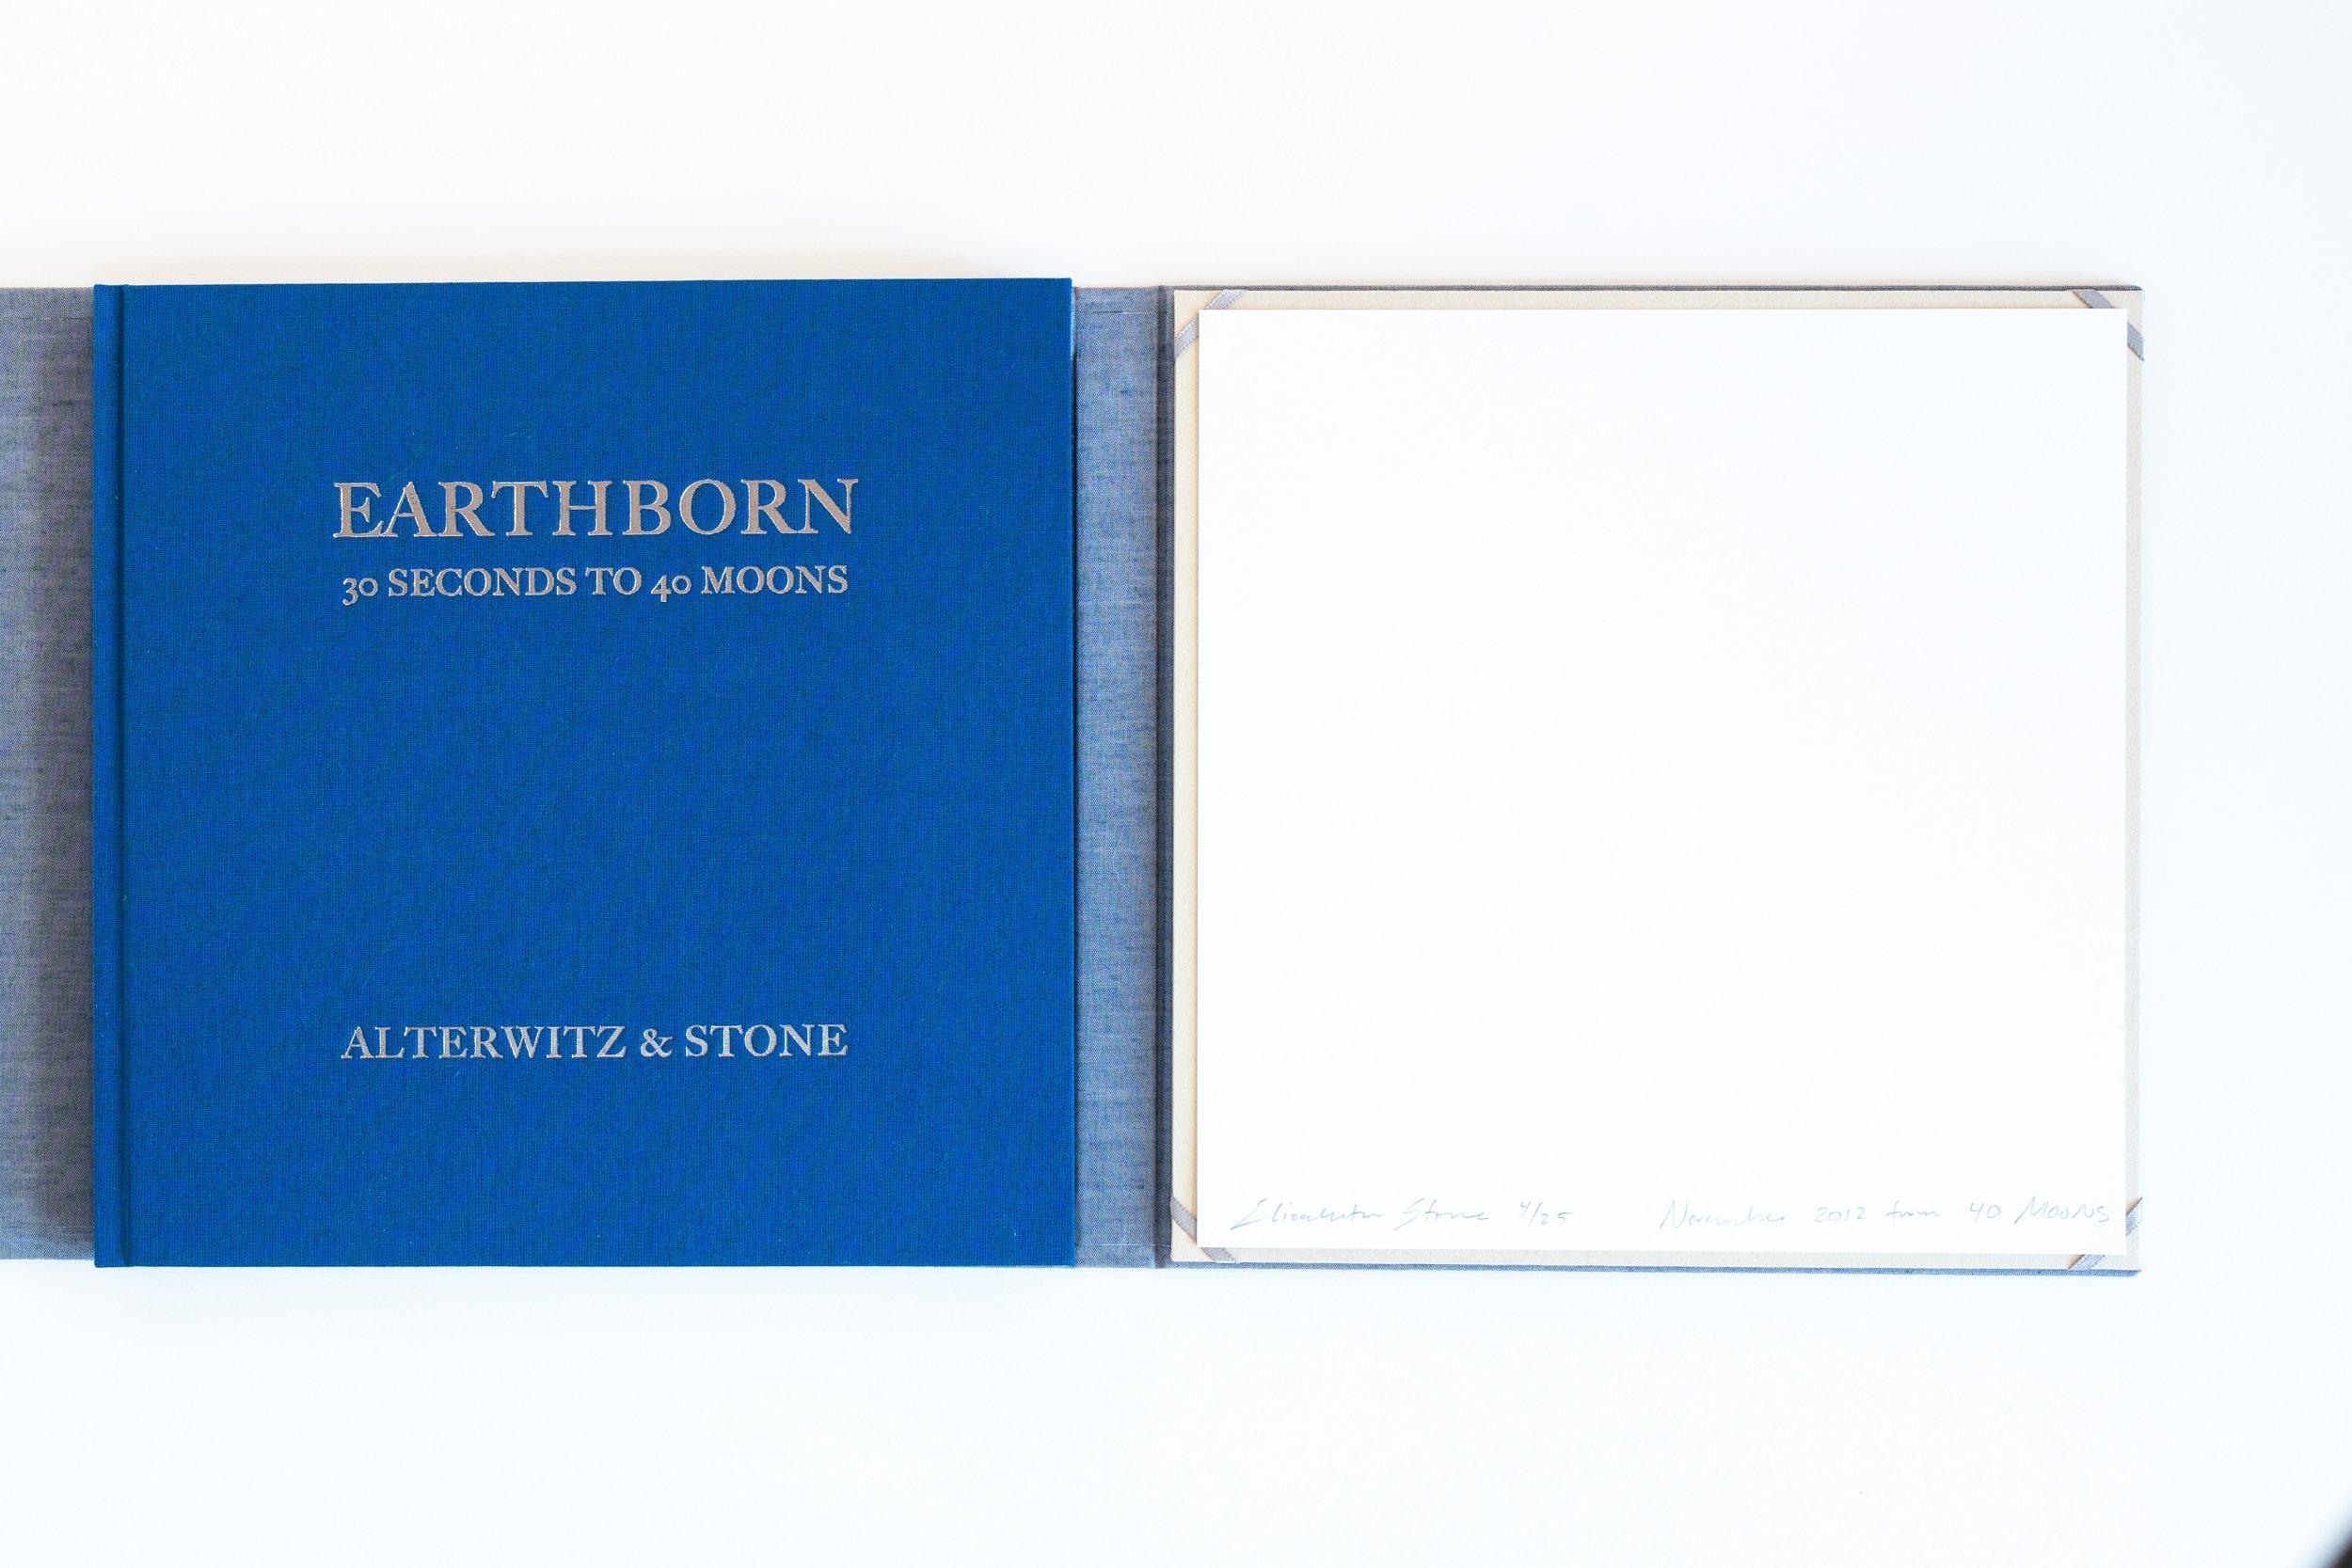 Acquire_Earthborn_Limited_Edition_07.jpg